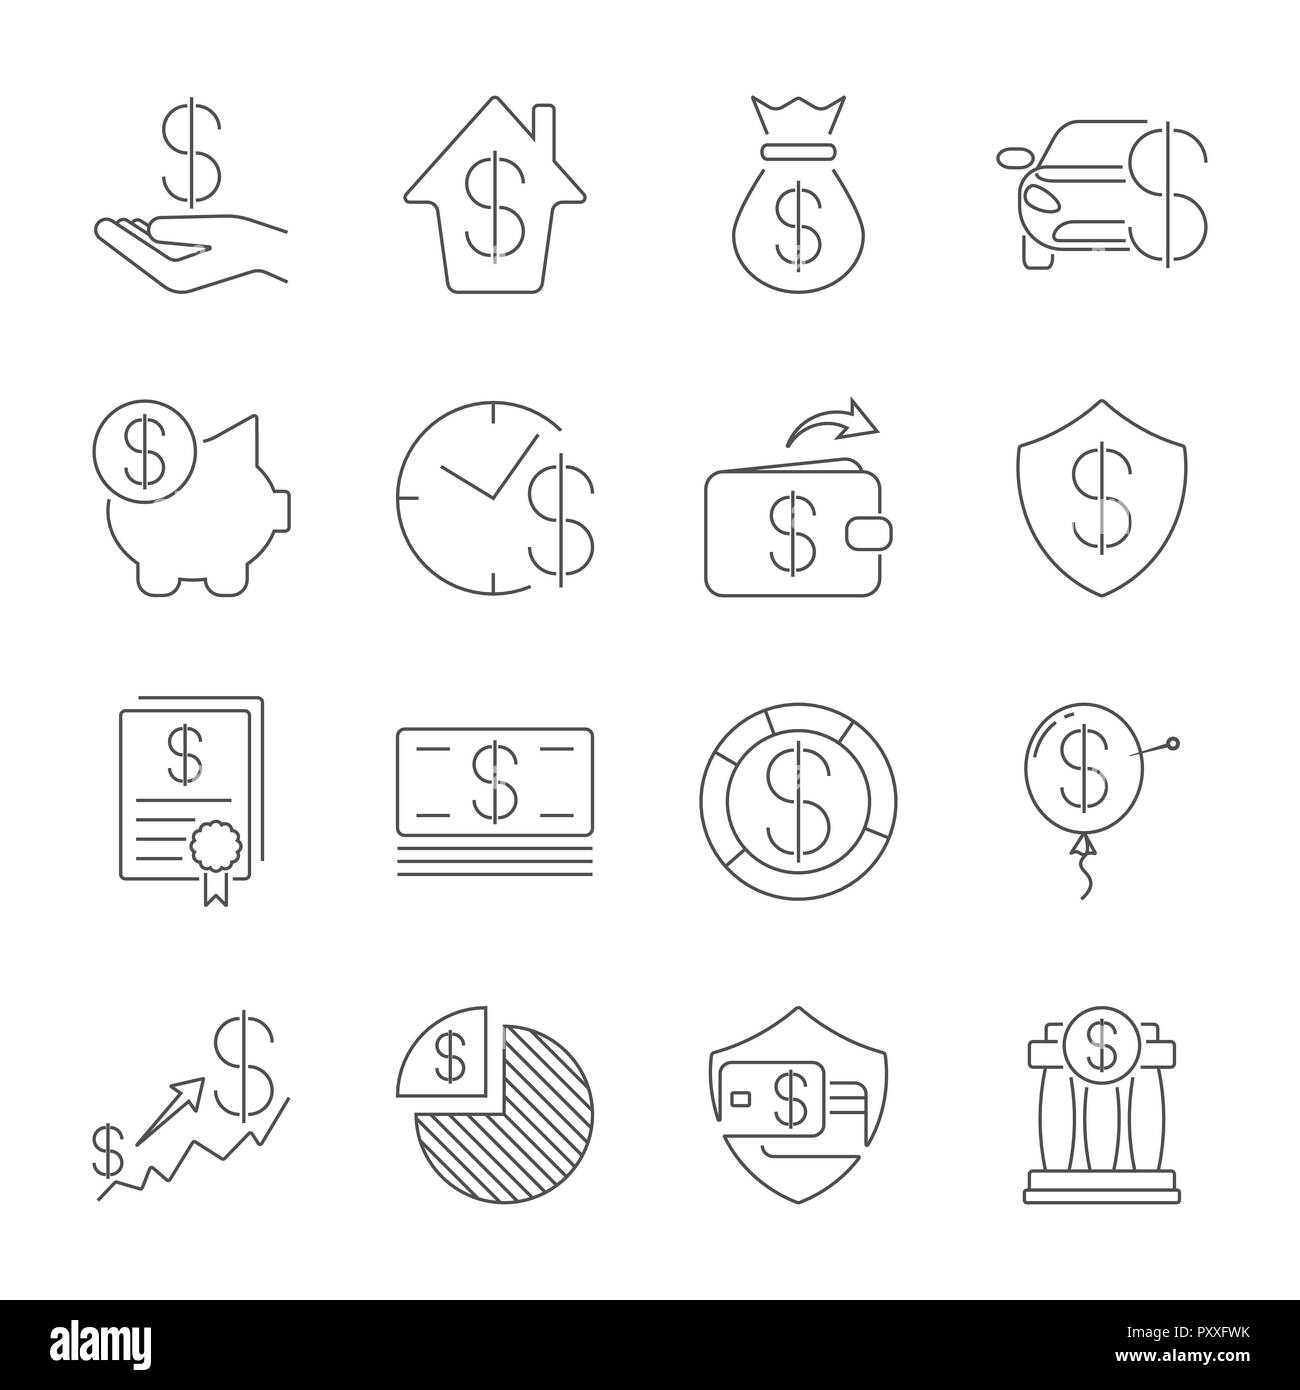 Simple Set of Money Related Vector Line Icons. Thin line vector icon set - dollar, credit card, wallet, cash, money bag, piggy bank, investment, stack, check, receipt, shield. Editable Stroke Stock Vector